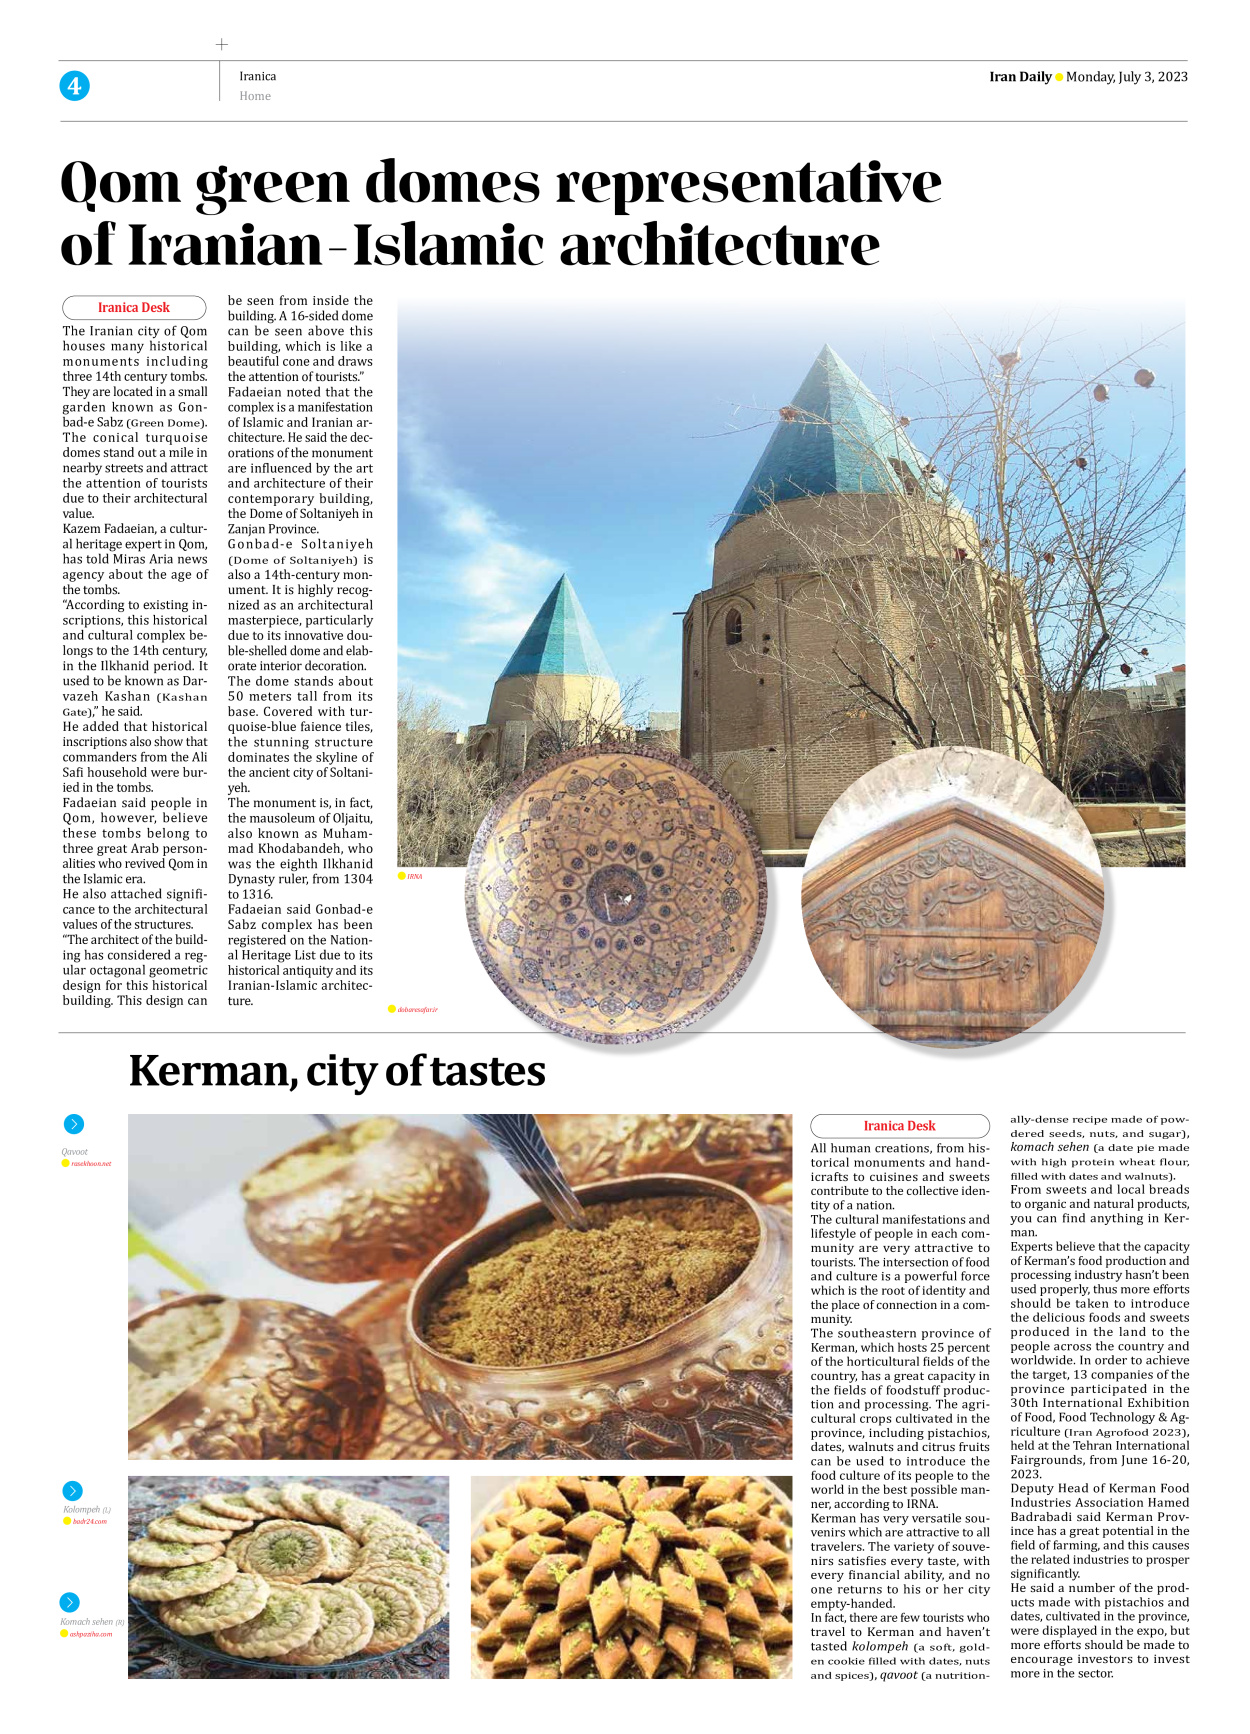 Iran Daily - Number Seven Thousand Three Hundred and Twenty Nine - 03 July 2023 - Page 4